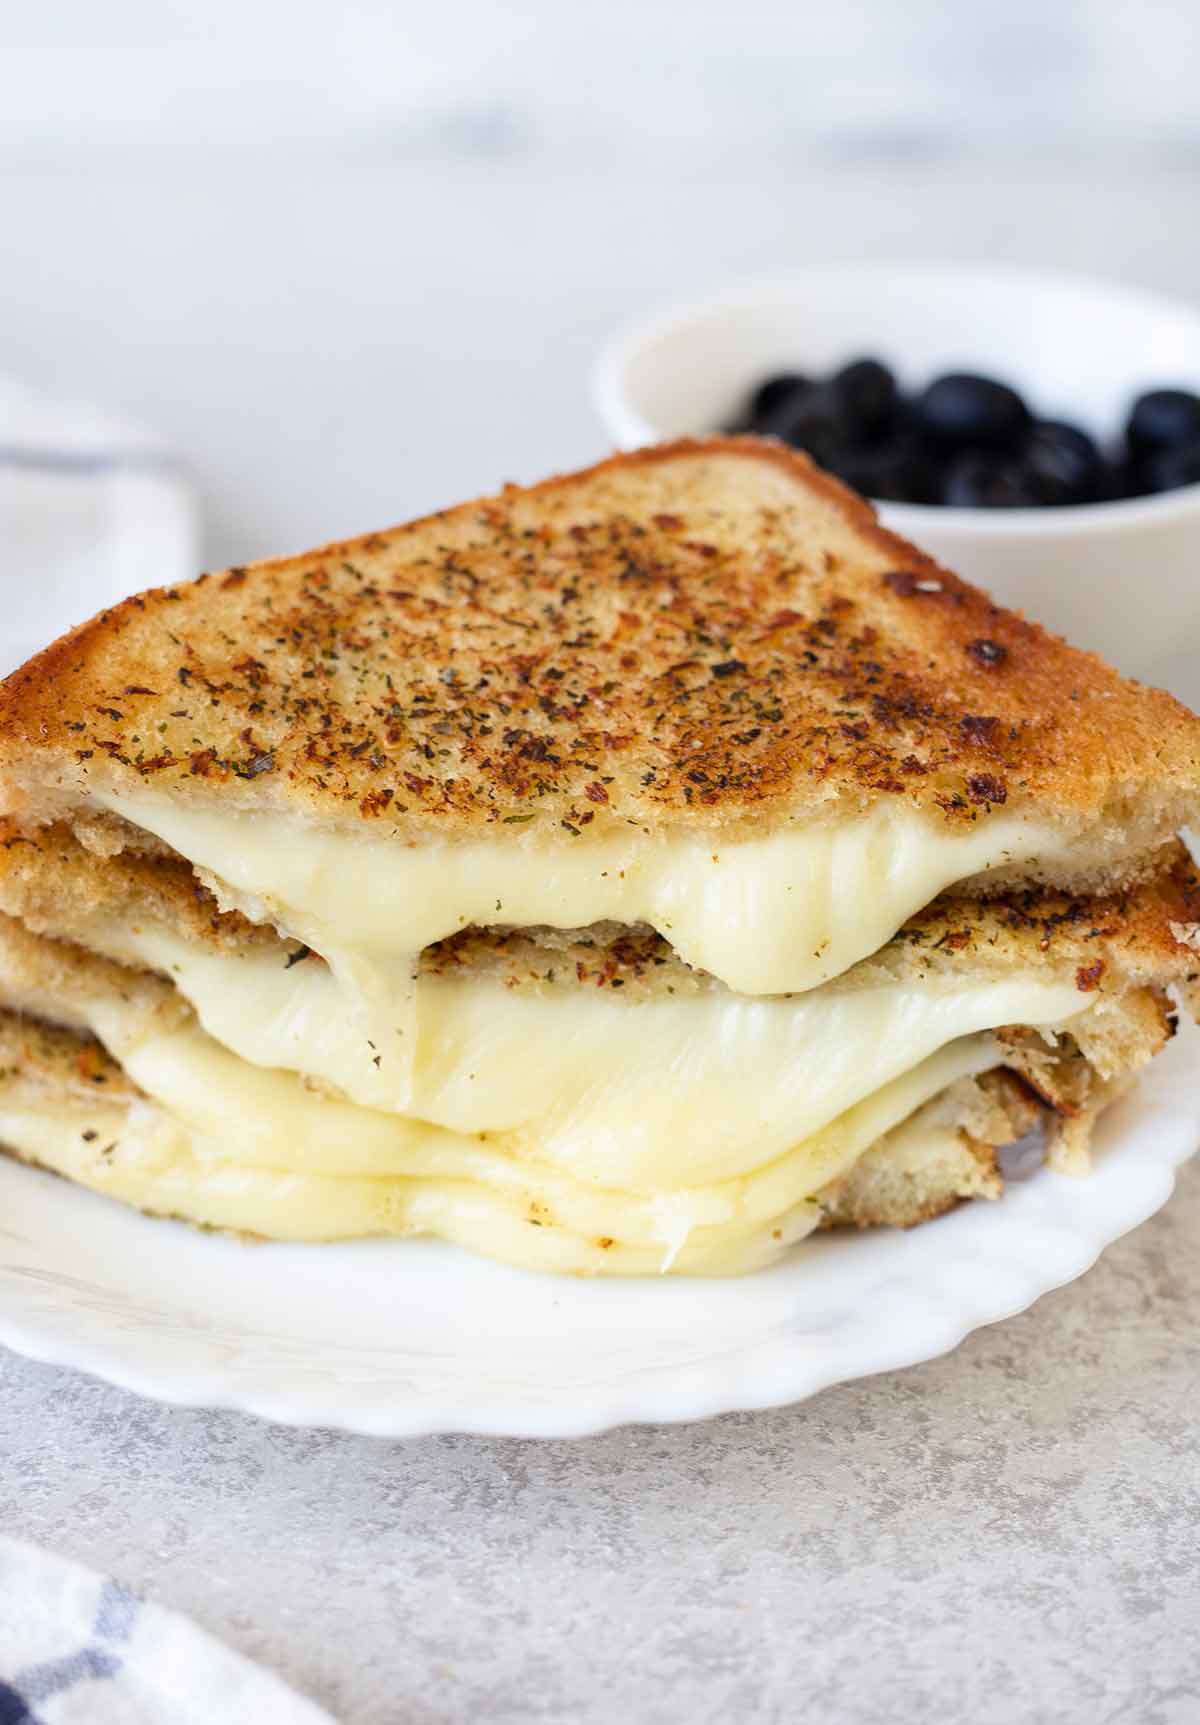 ooey-gooey melted cheese comes out of the grilled cheese sandwich.